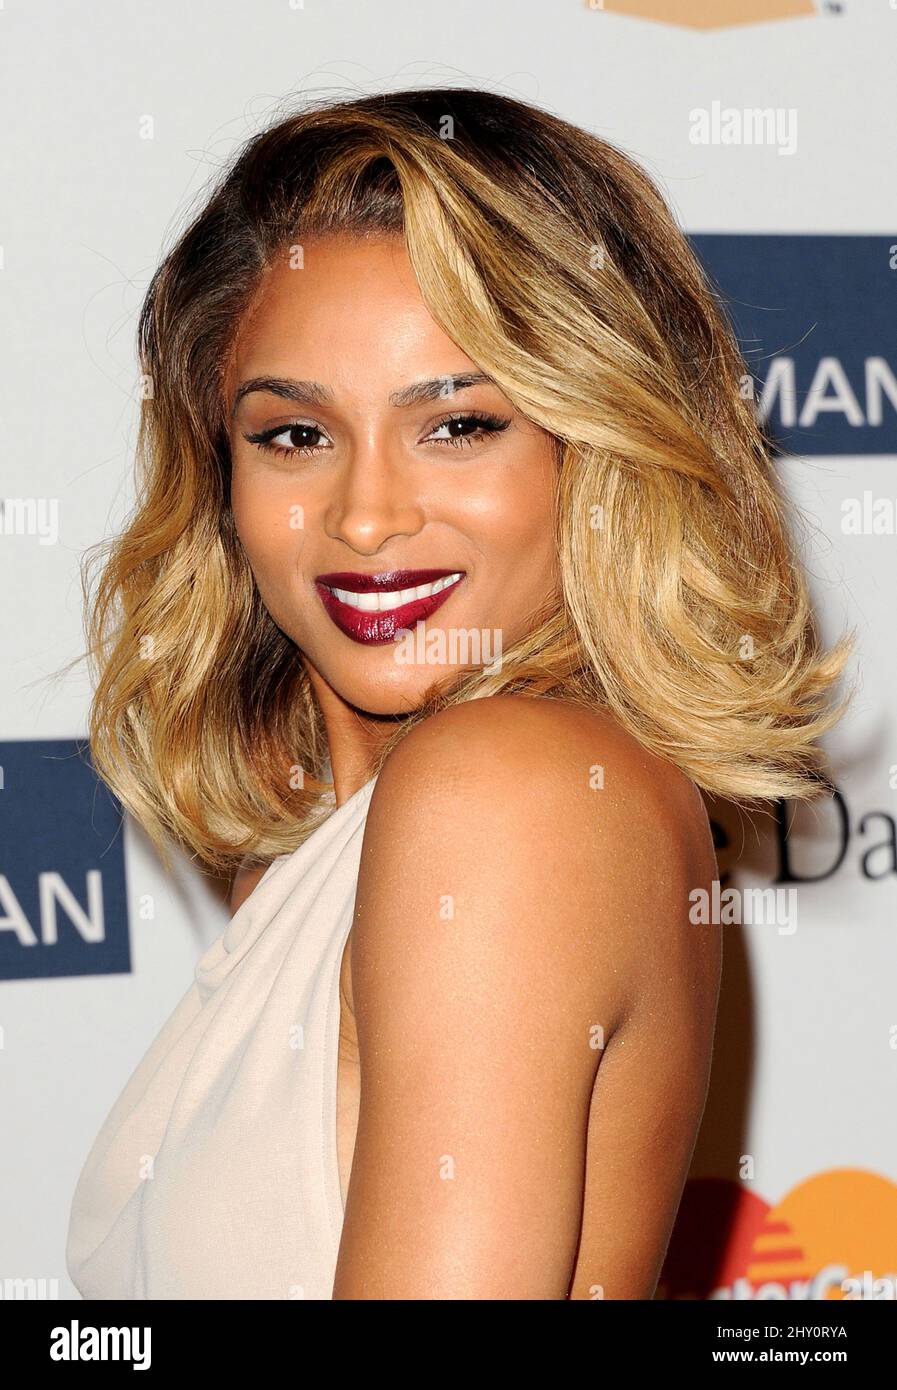 Ciara attending the 2013 Clive Davis Pre-Grammy Gala held at The Beverly Hilton Hotel, USA. Stock Photo